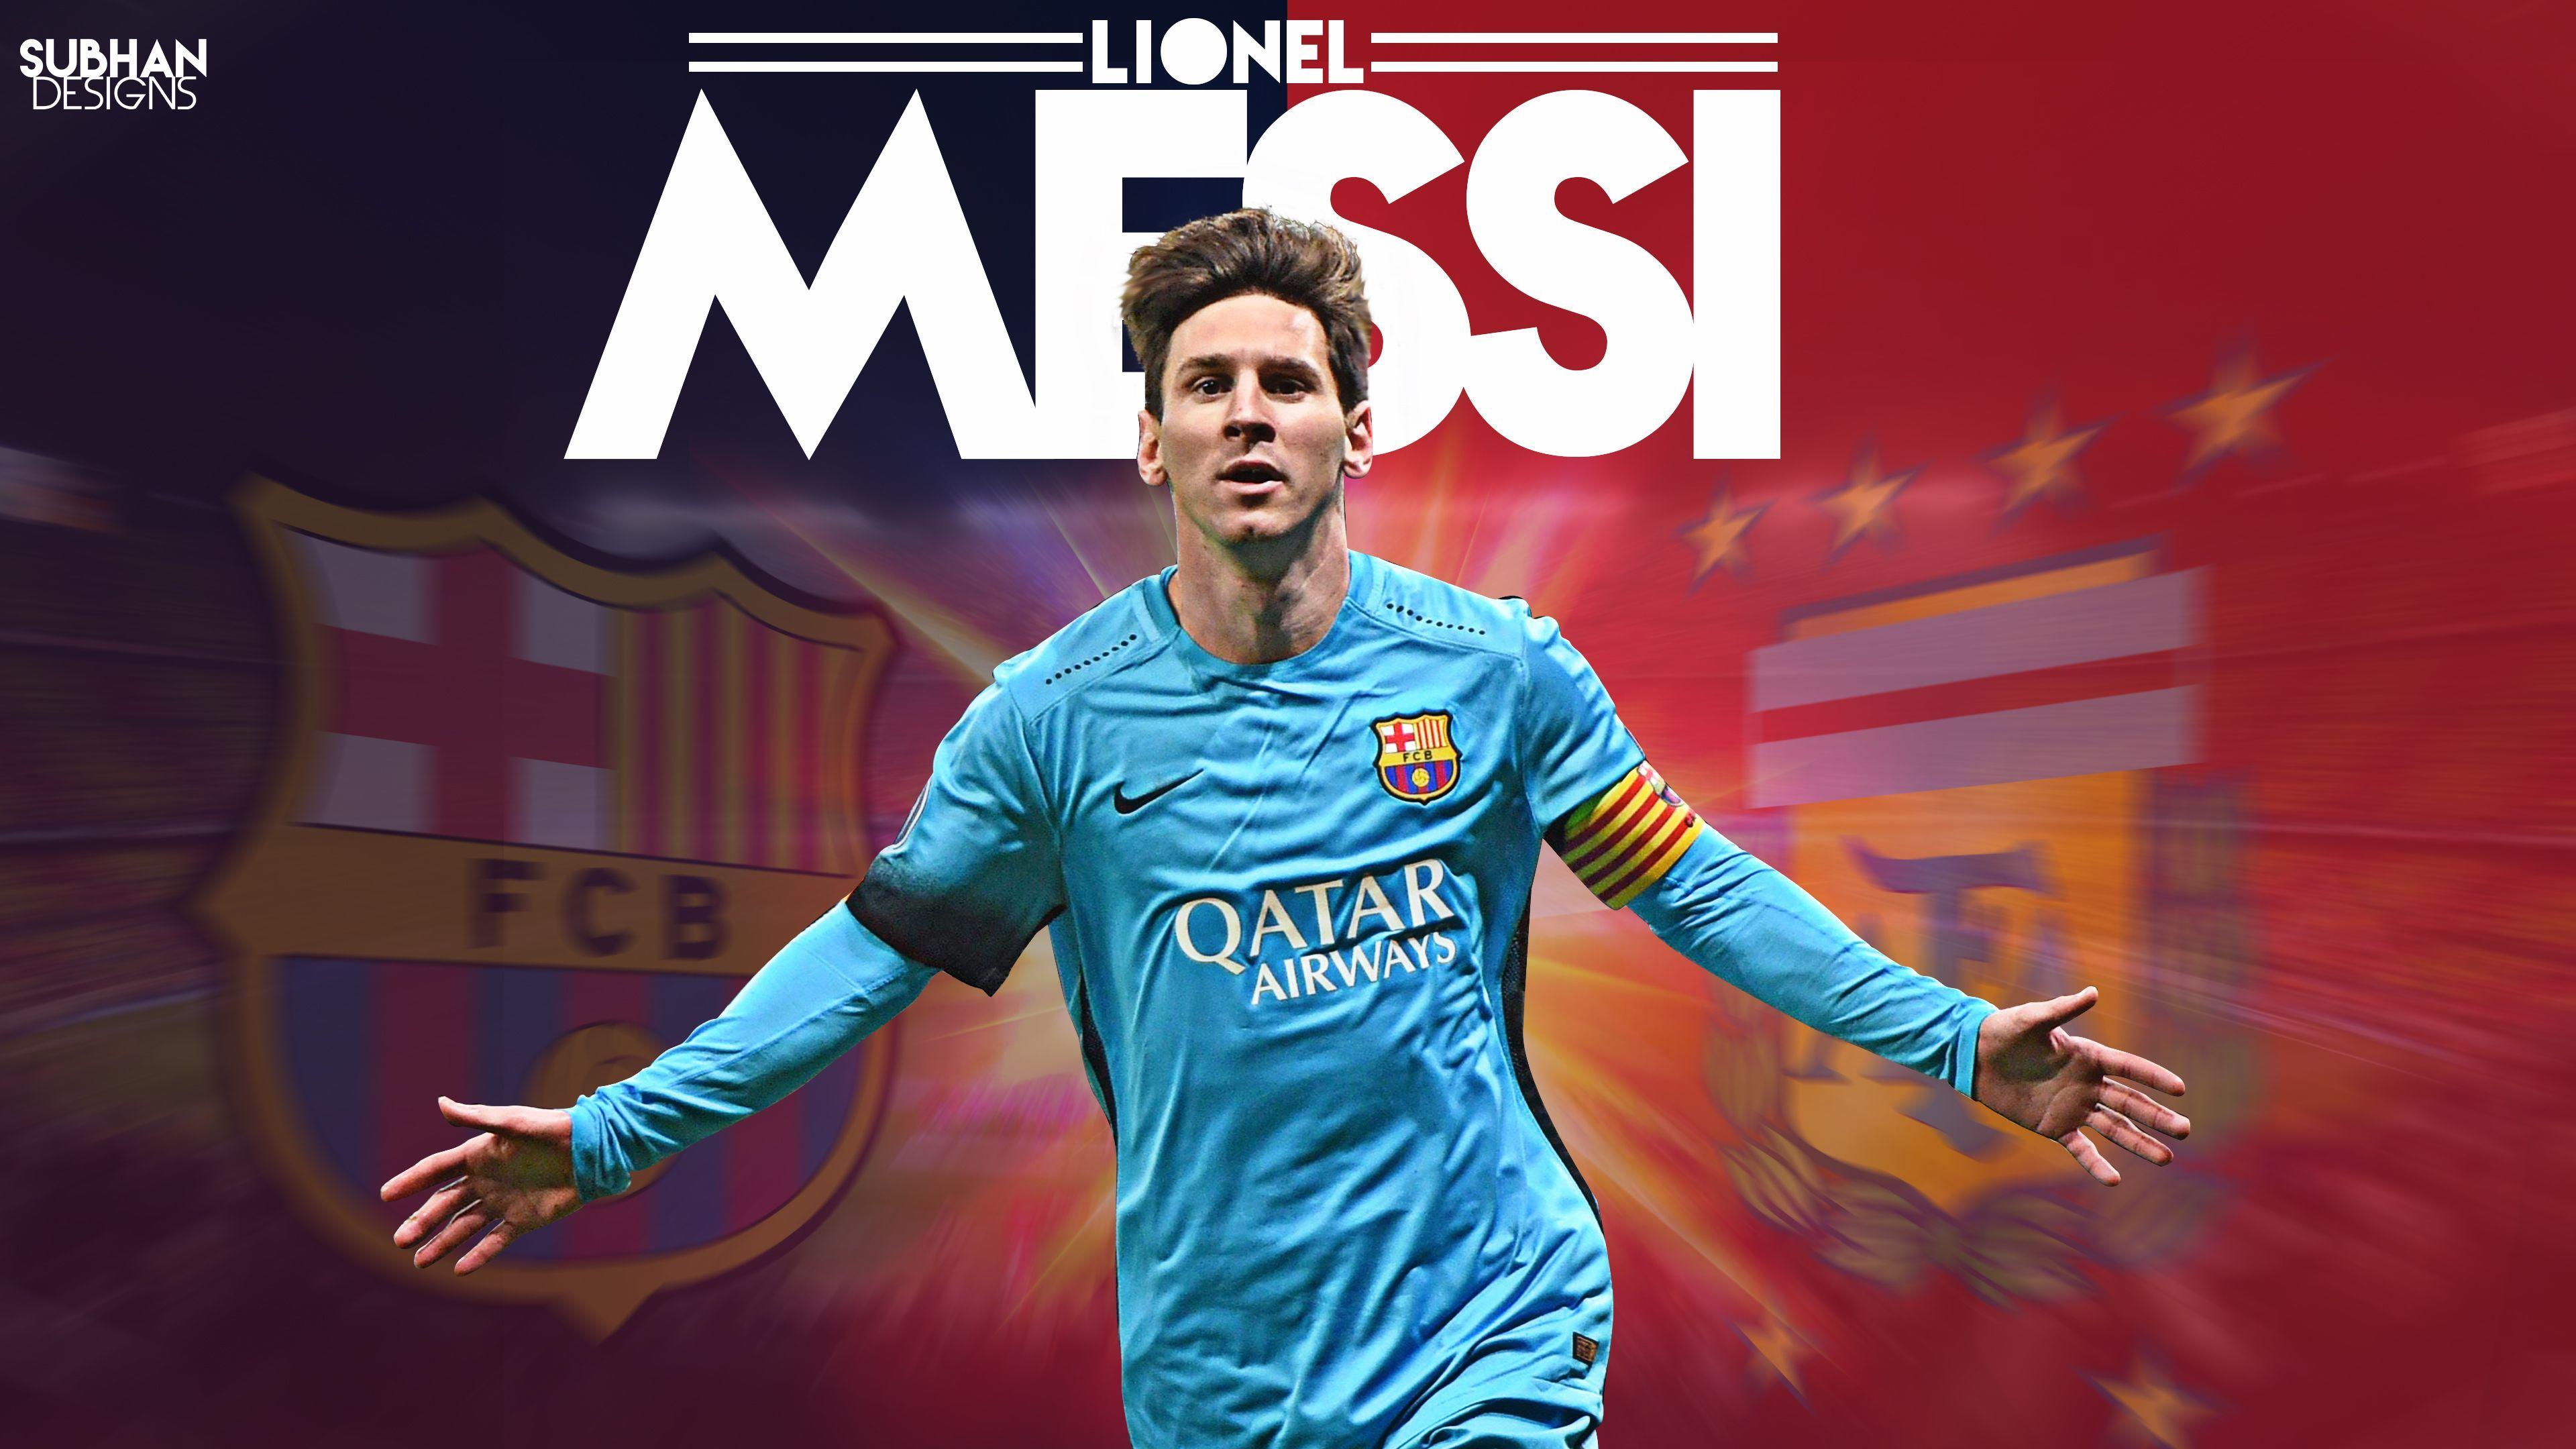 Lionel Messi 2016 Wallpaper HD Wallpaper Background of Your